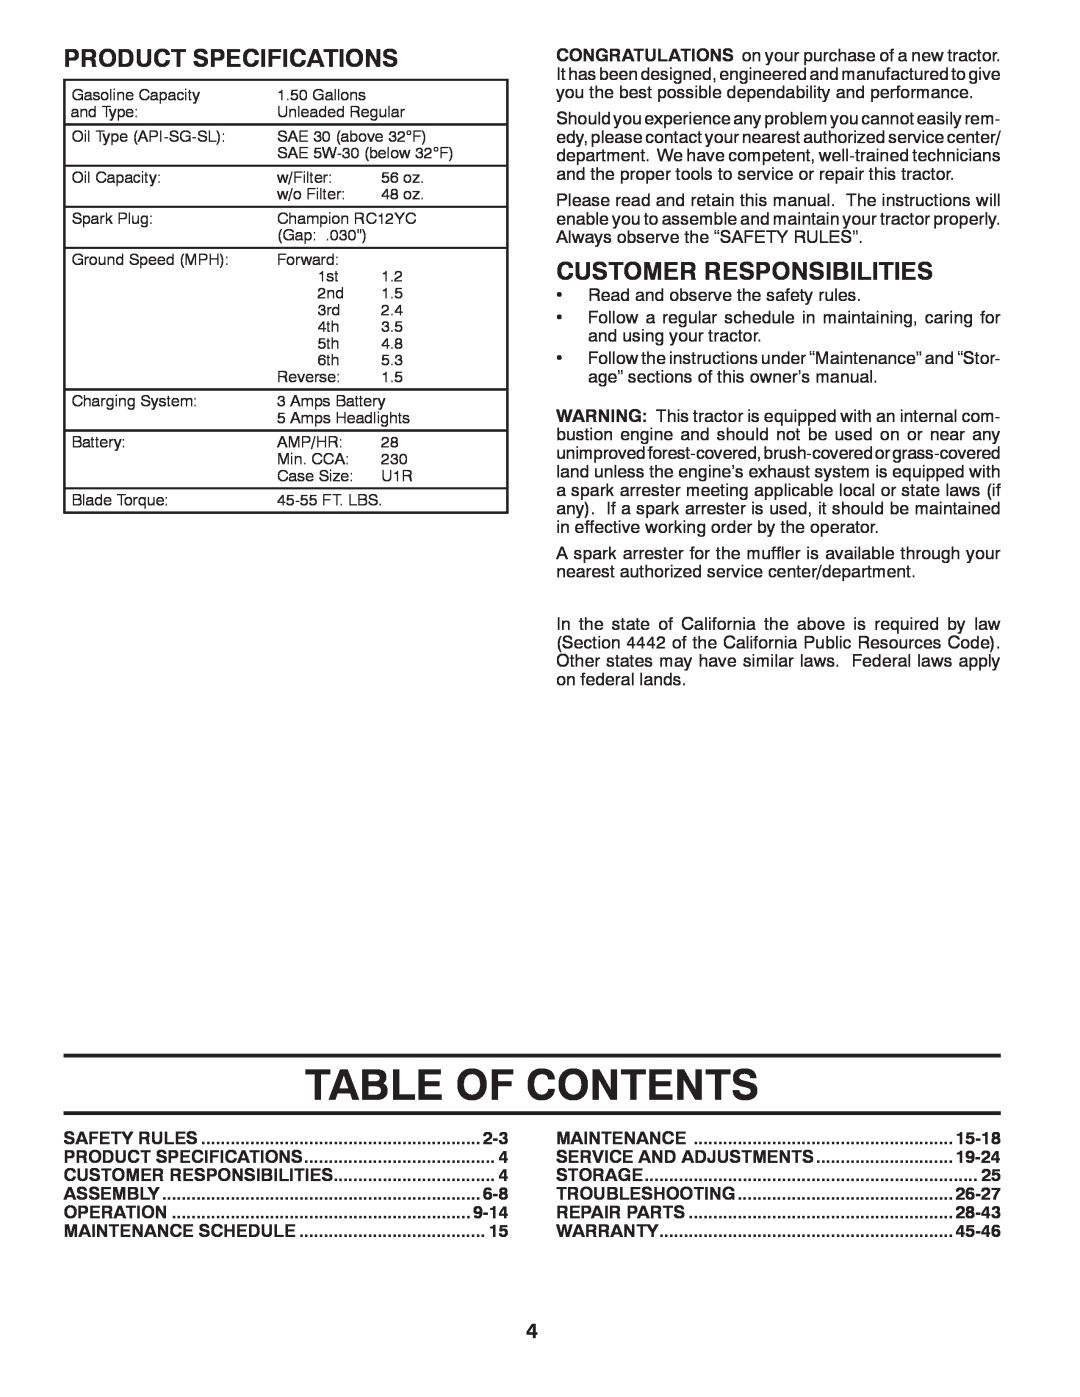 Poulan 96042002400 Table Of Contents, Product Specifications, Customer Responsibilities, 9-14, 15-18, 19-24, 26-27, 28-43 